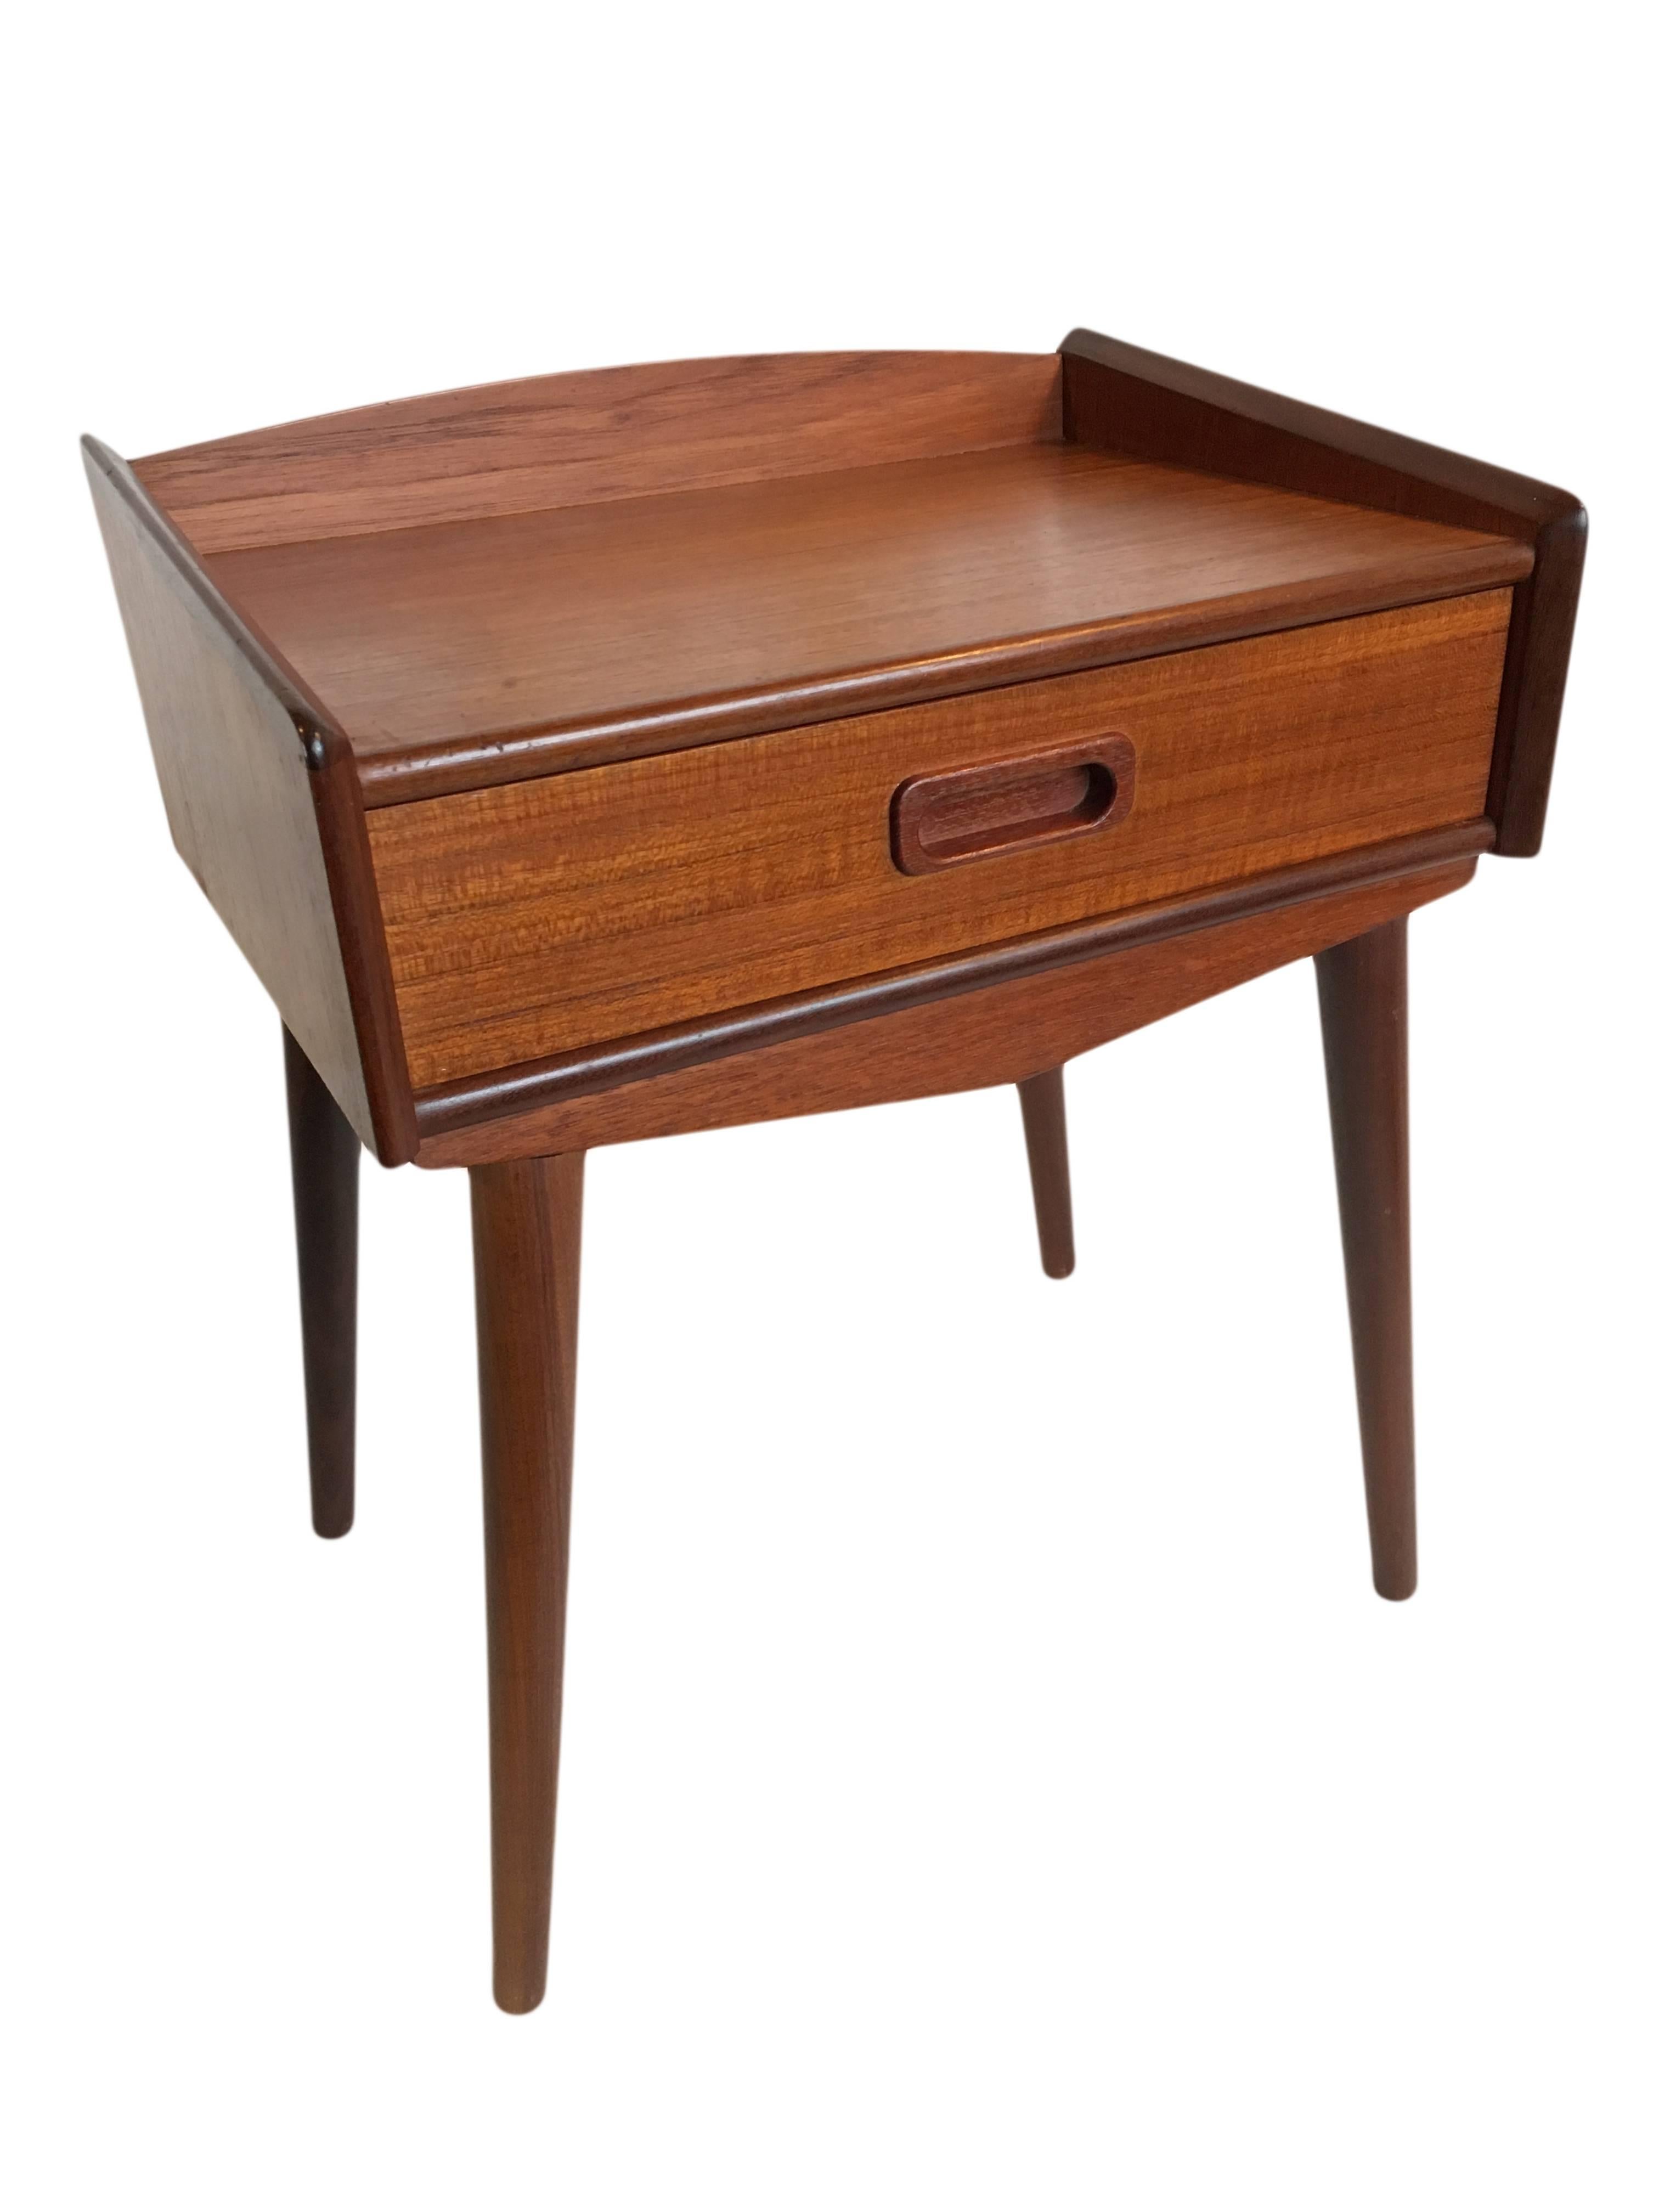 Single Danish teak Midcentury nightstand. Can also be wall hung without its legs. Great condition, circa 1960.